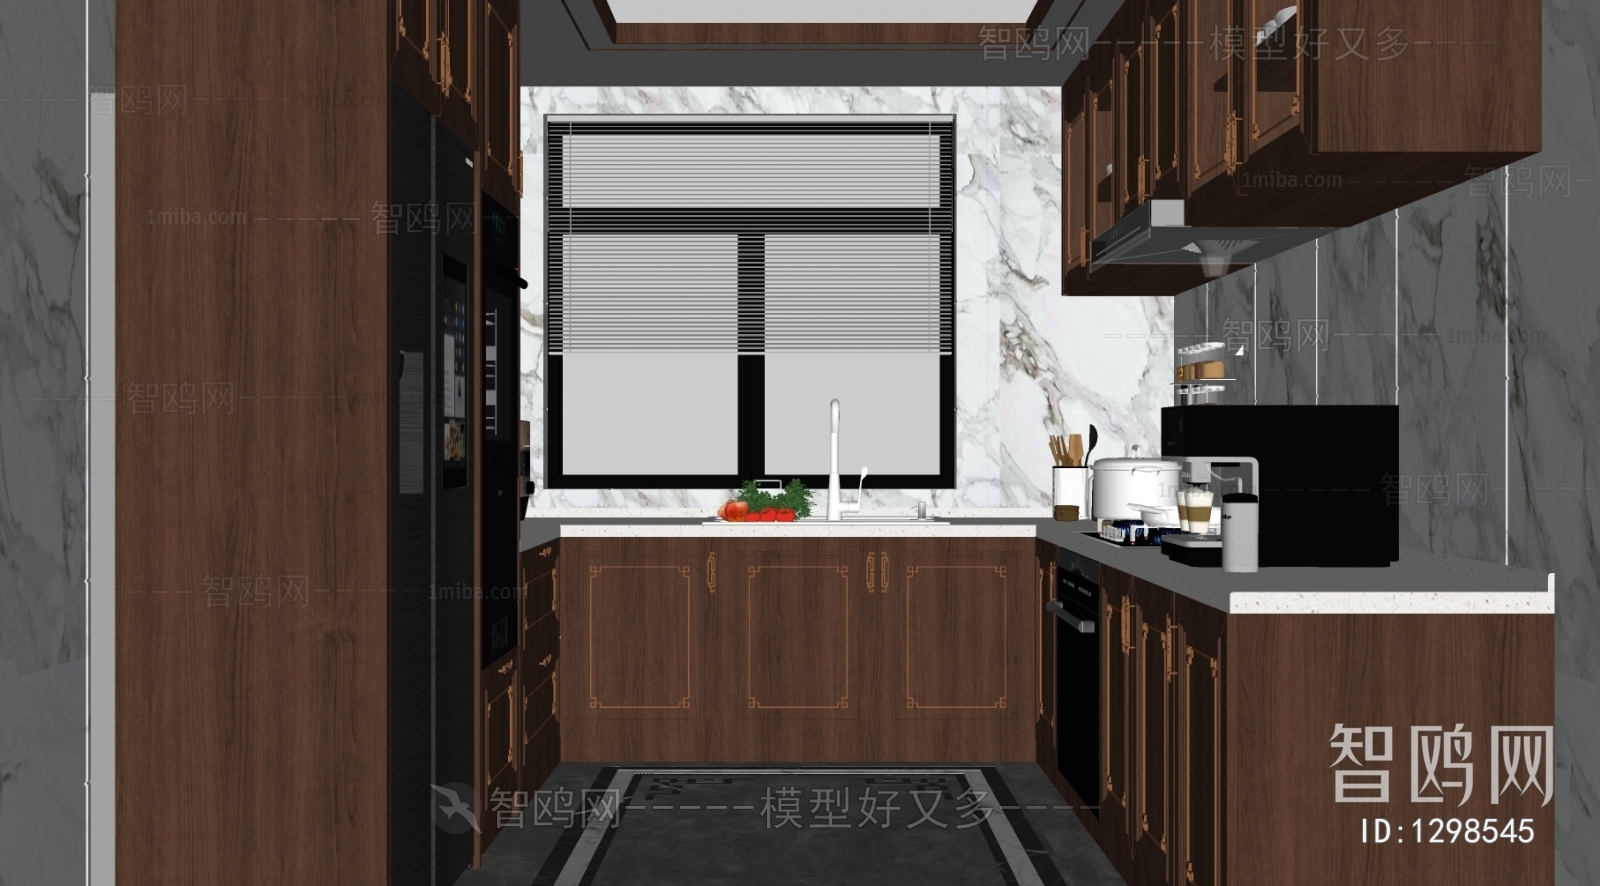 Chinese Style The Kitchen